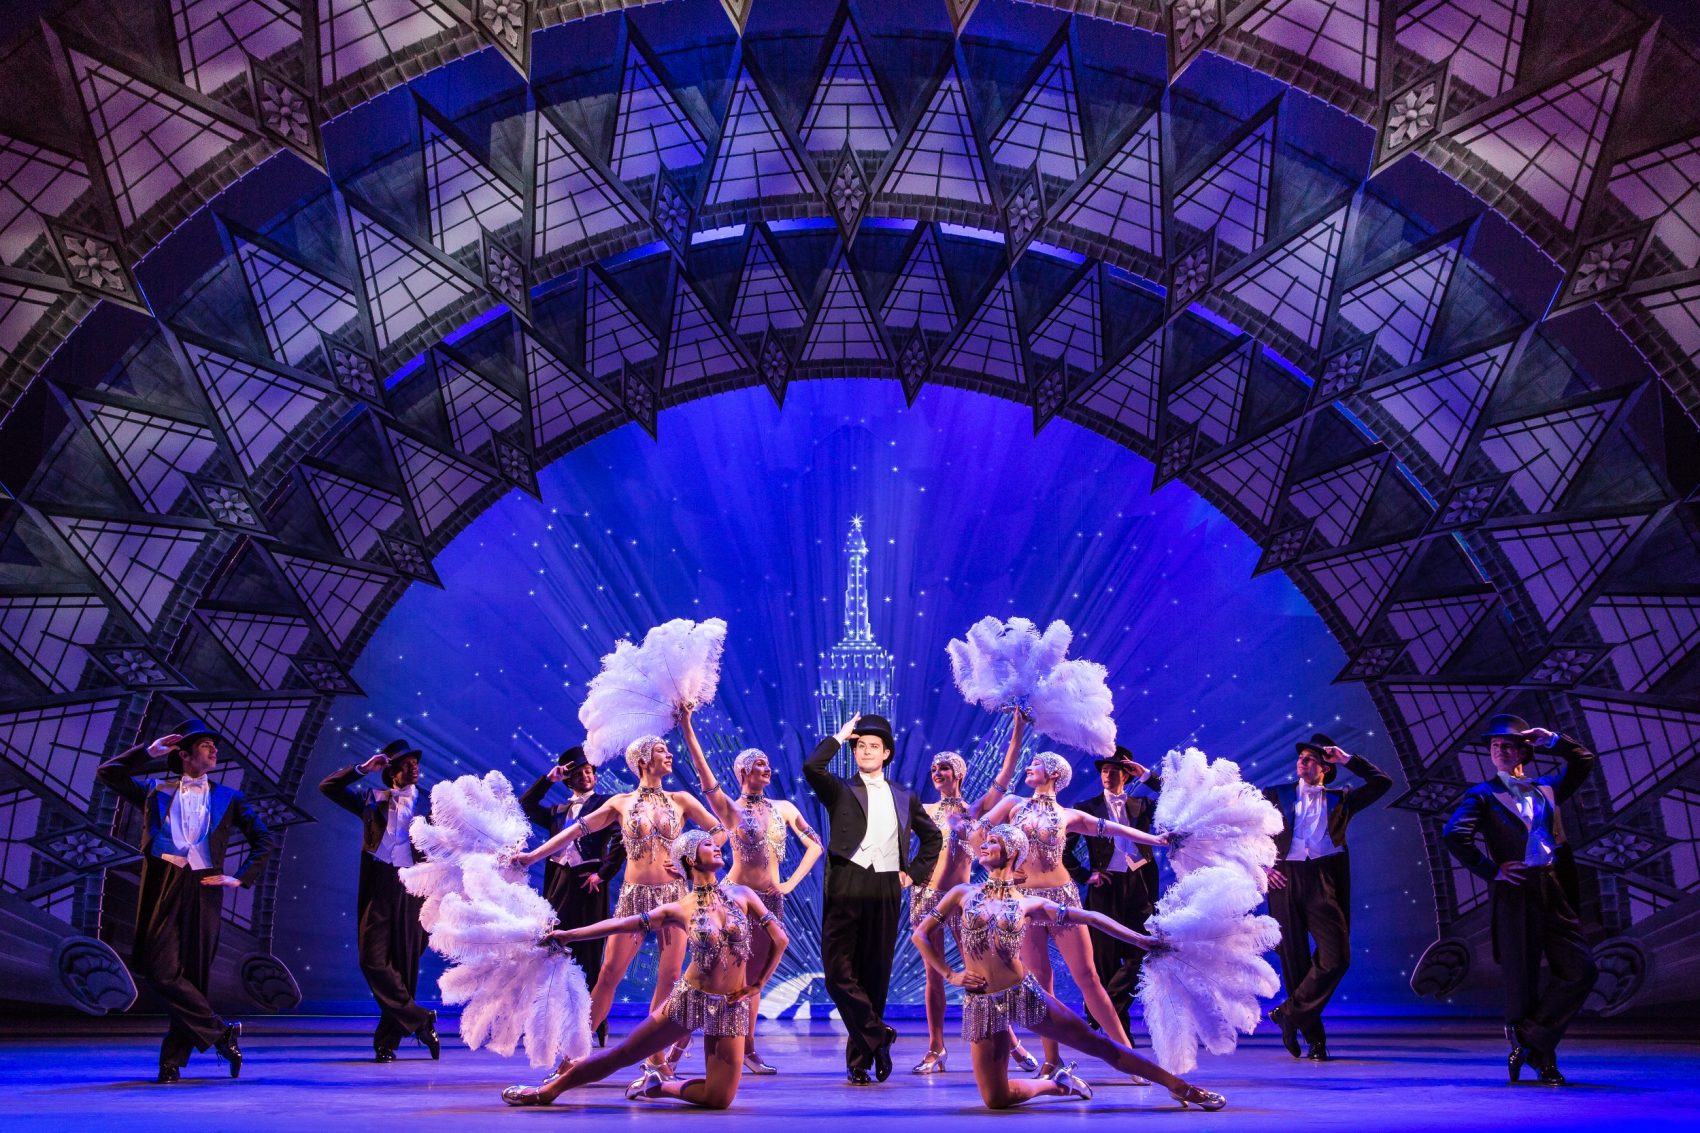 What inspired an American in Paris?